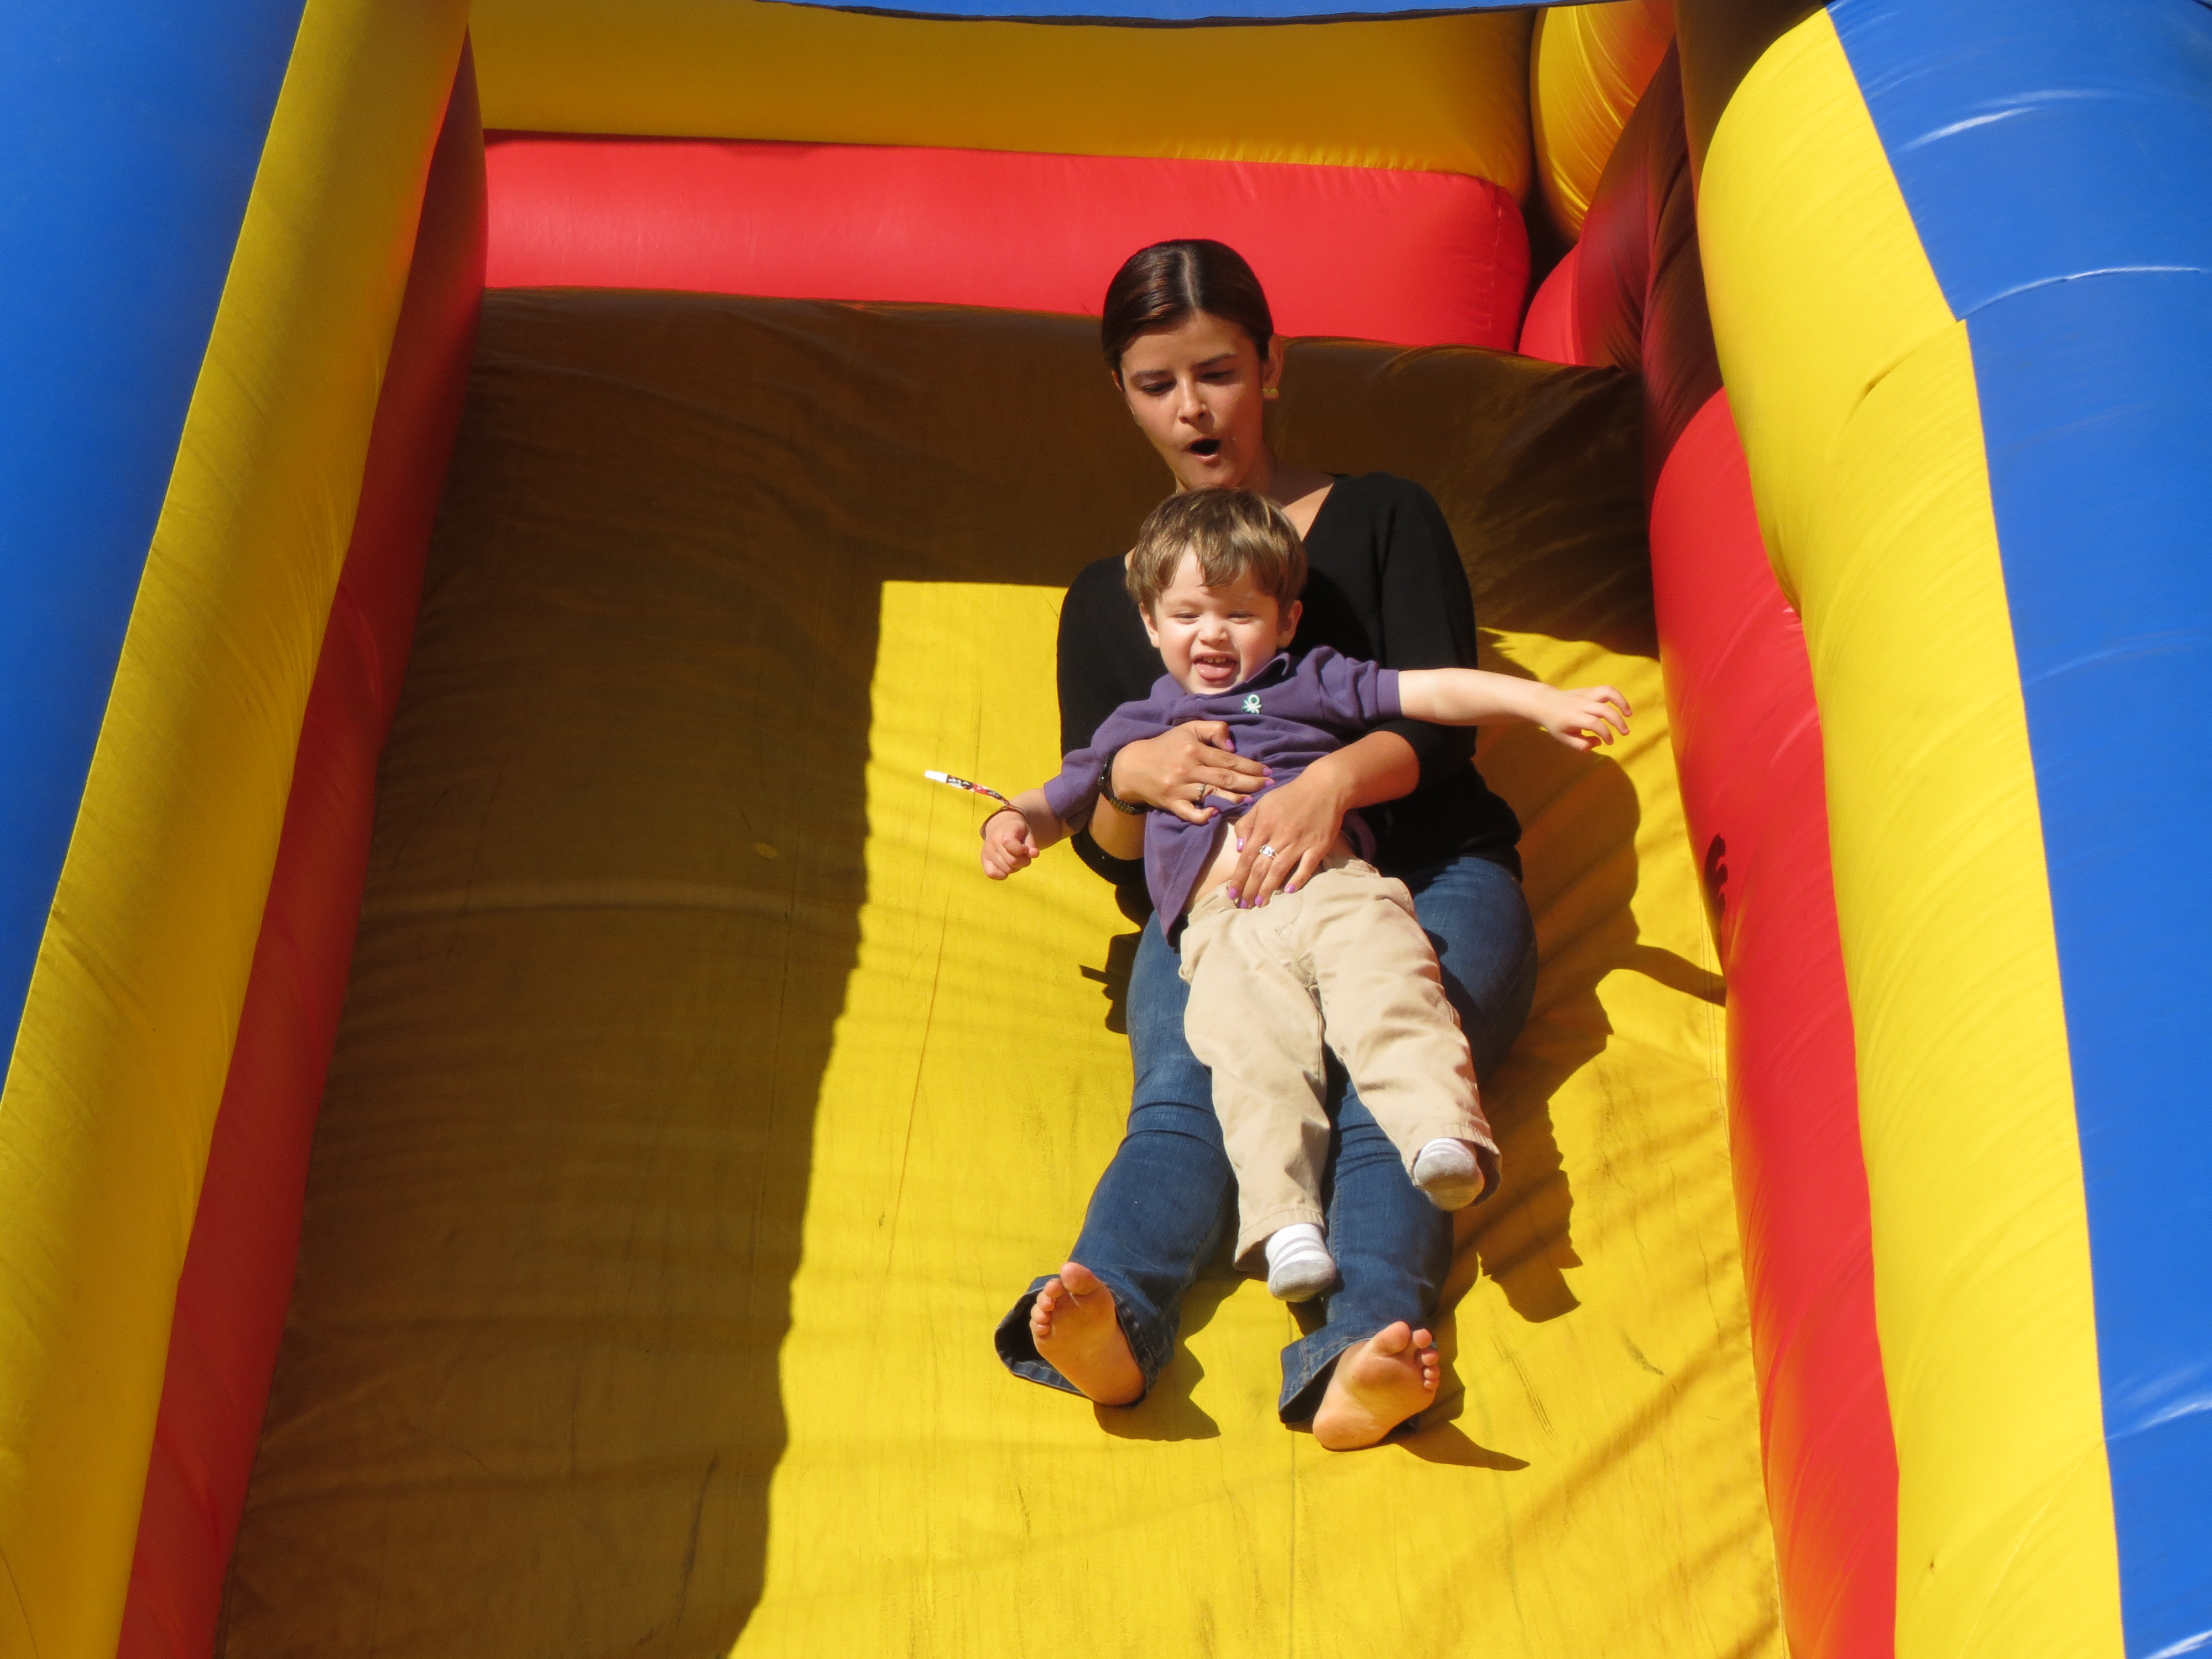 Children and adults alike had fun on a variety of rides, including inflatable slides.